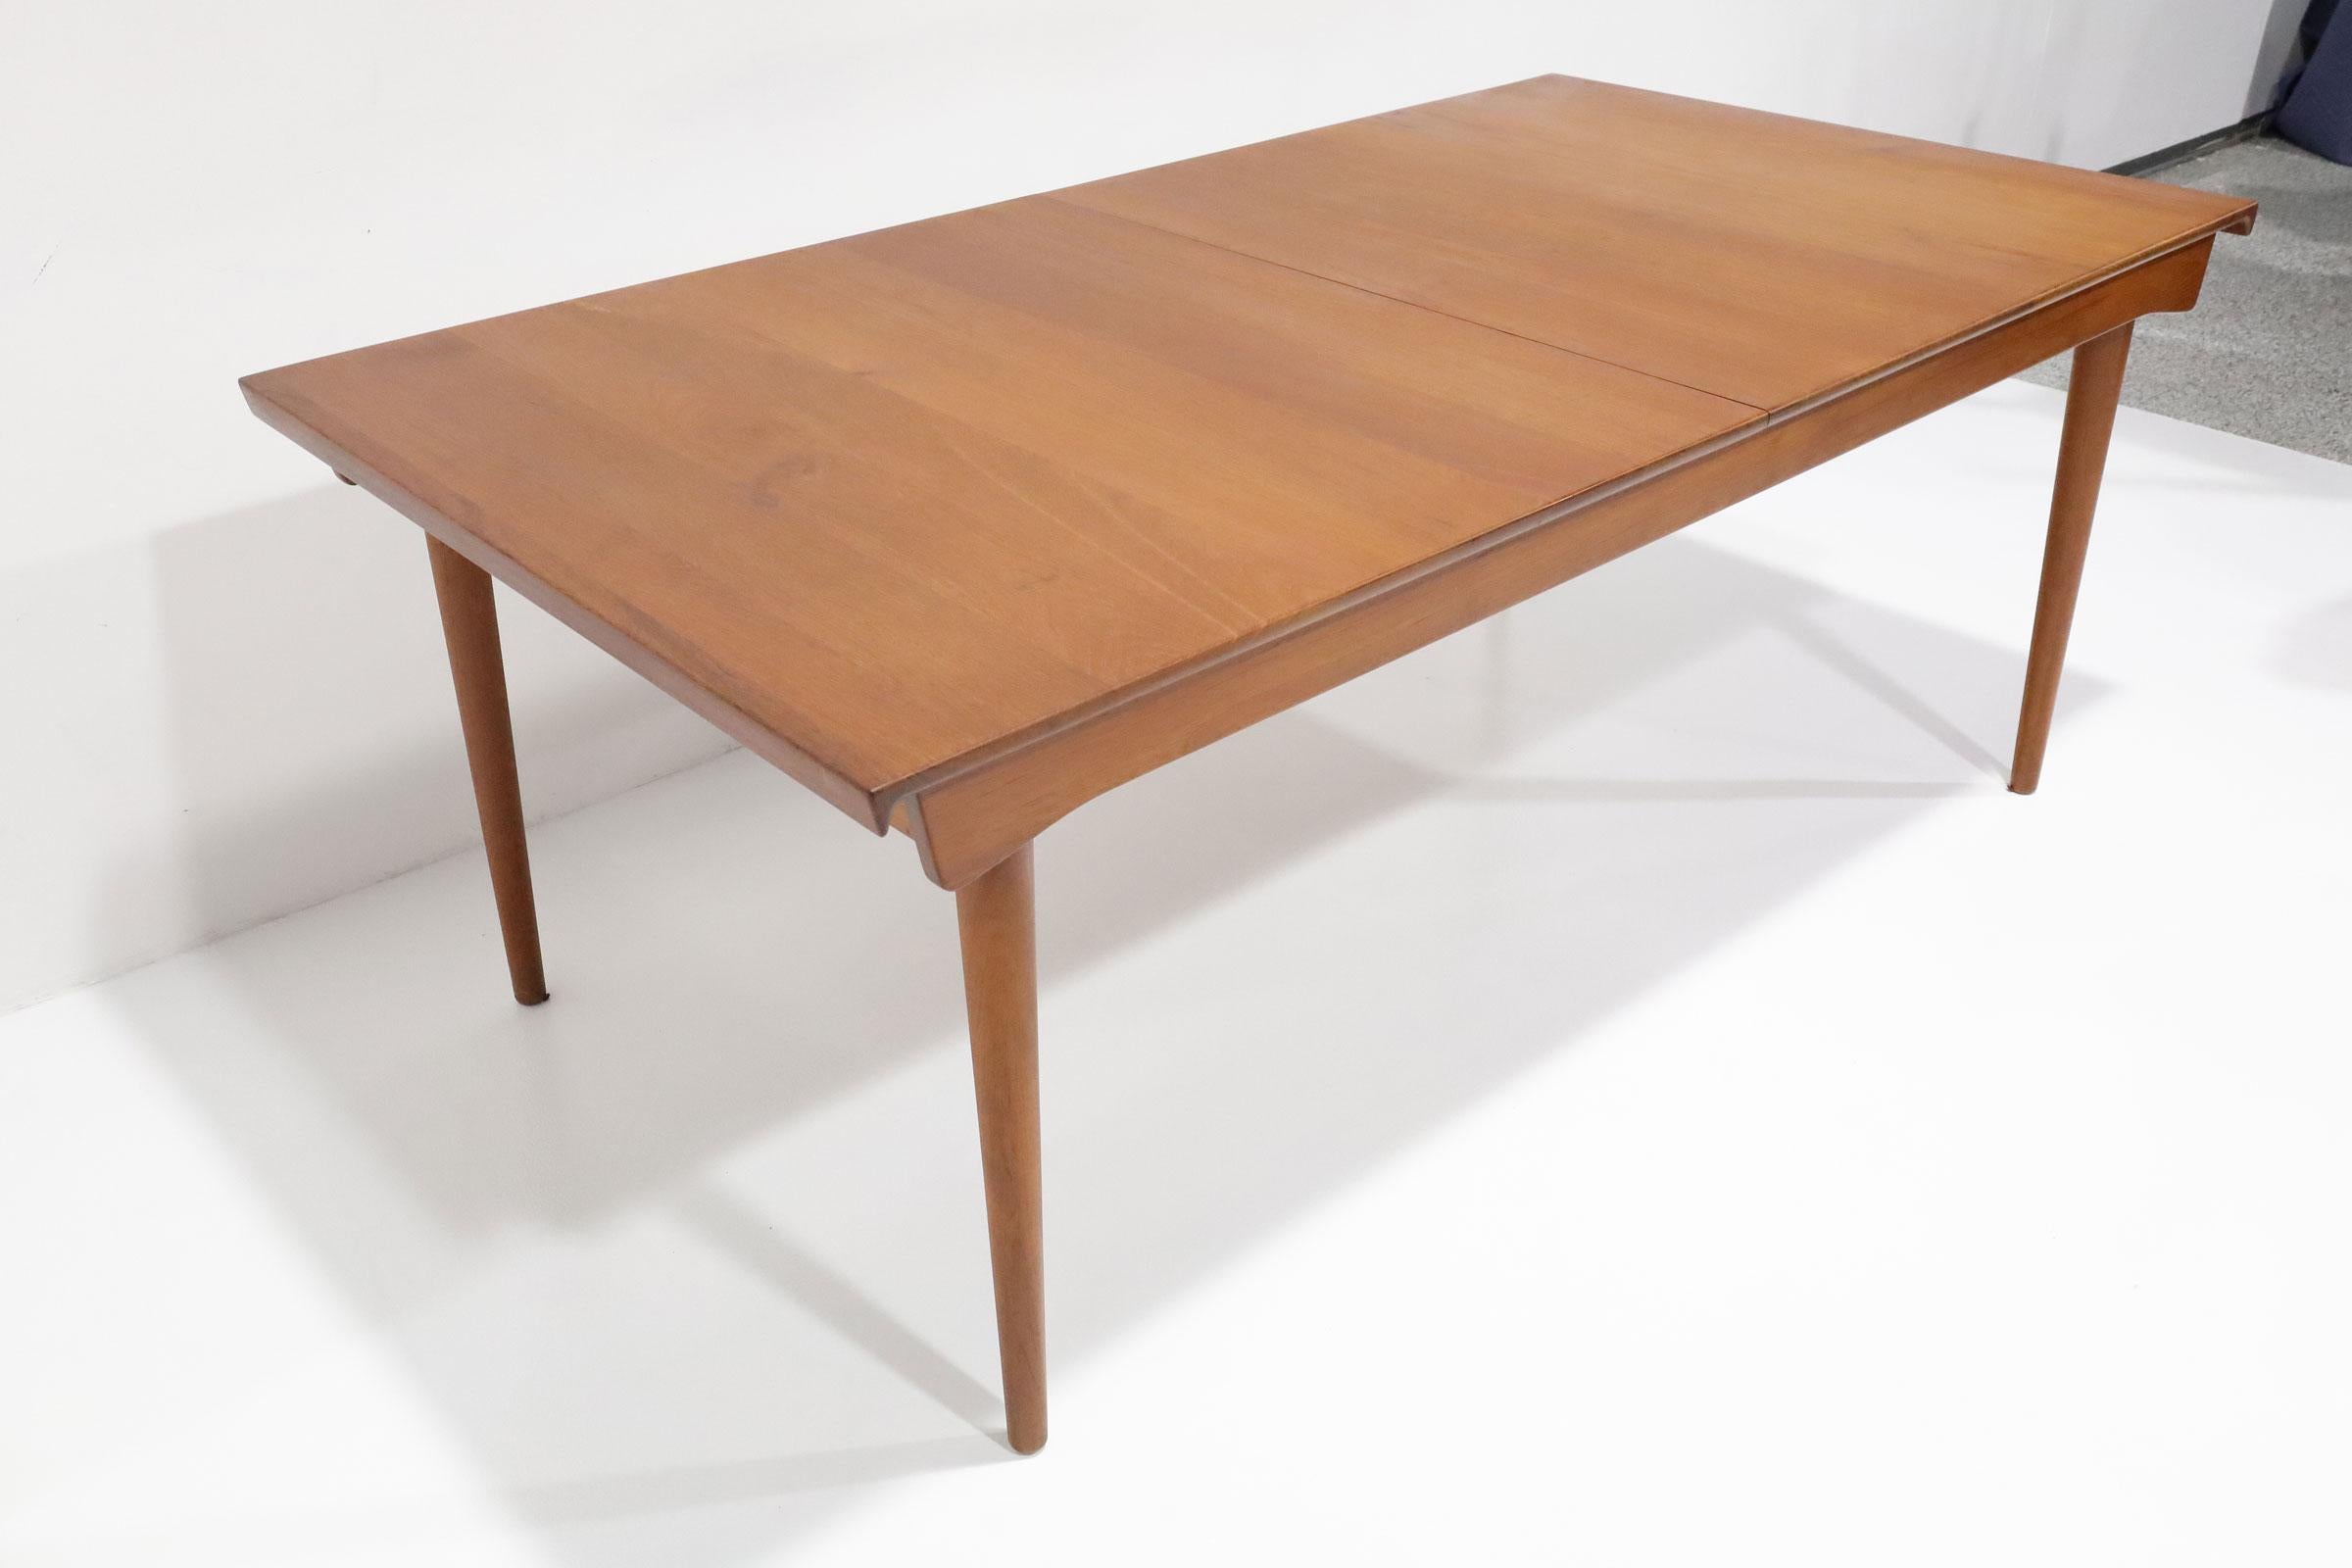 Finn Juhl FD 540 Teak Extension Dining Table by France & Son In Good Condition For Sale In Dallas, TX